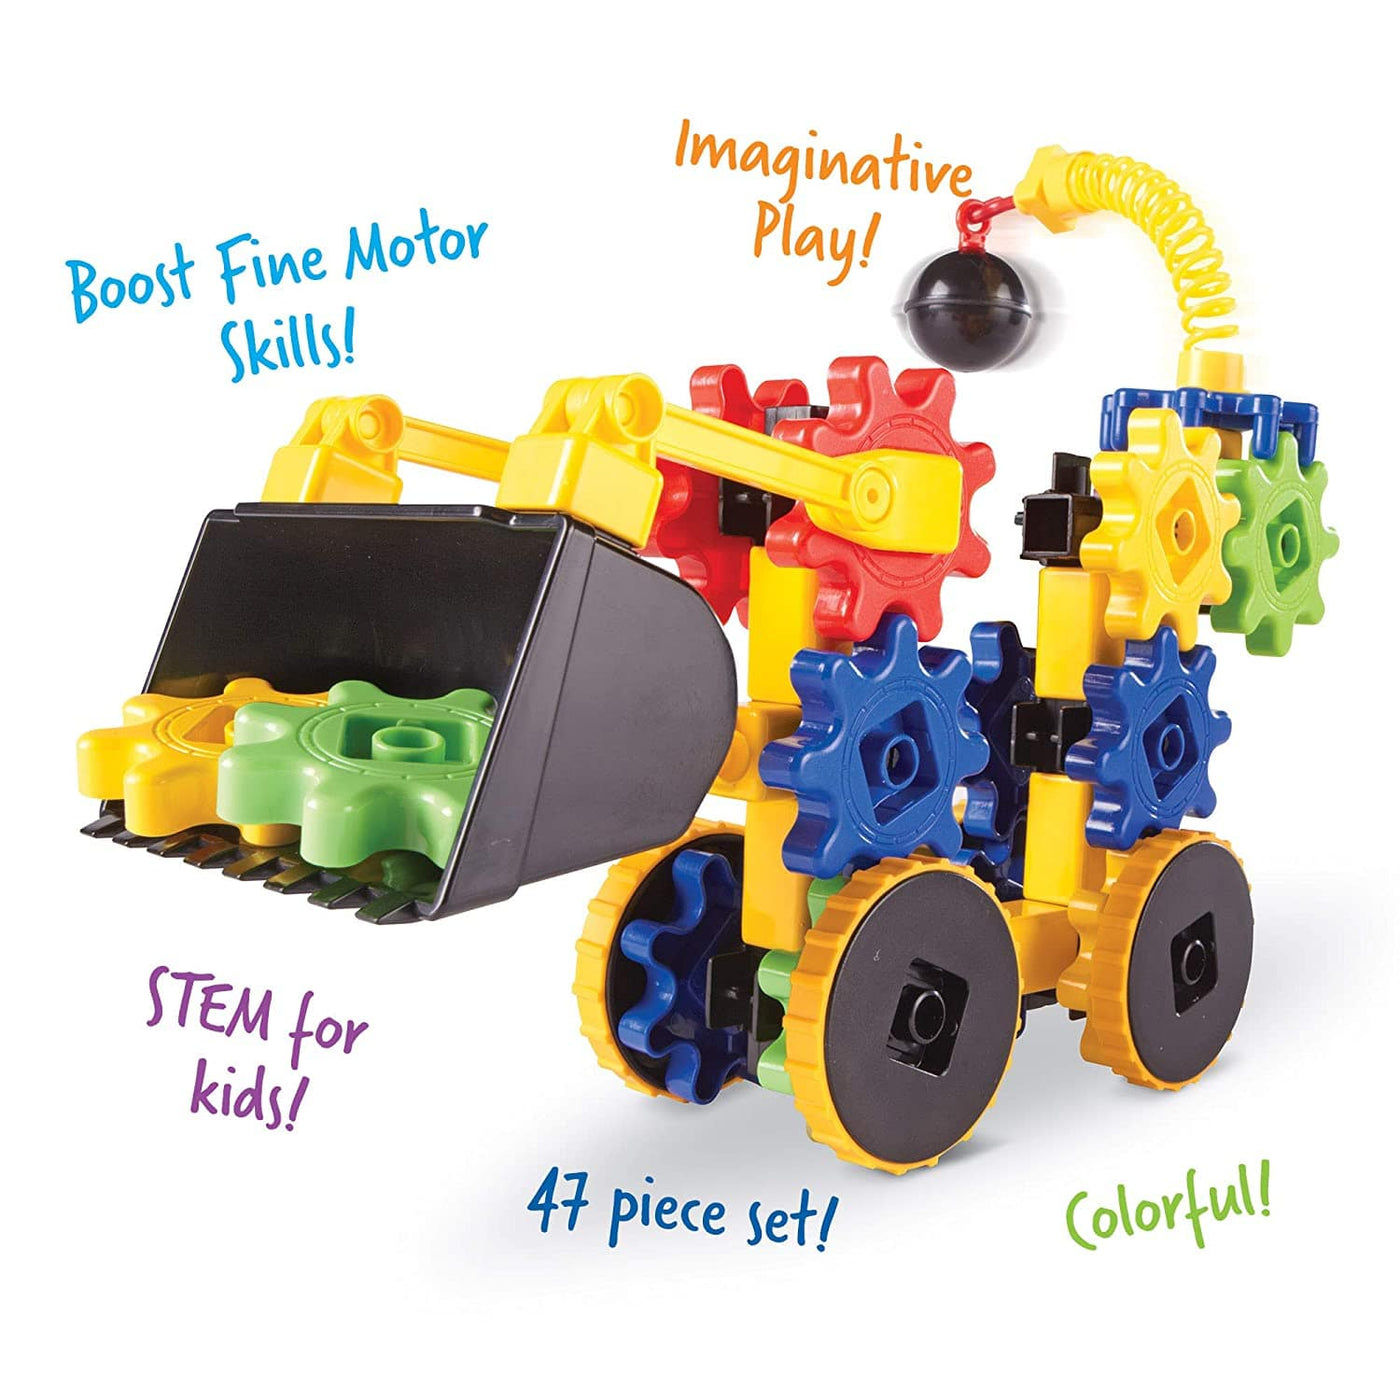 Wreckergears Gears! | Learning Resources® by Learning Resources, USA Toy